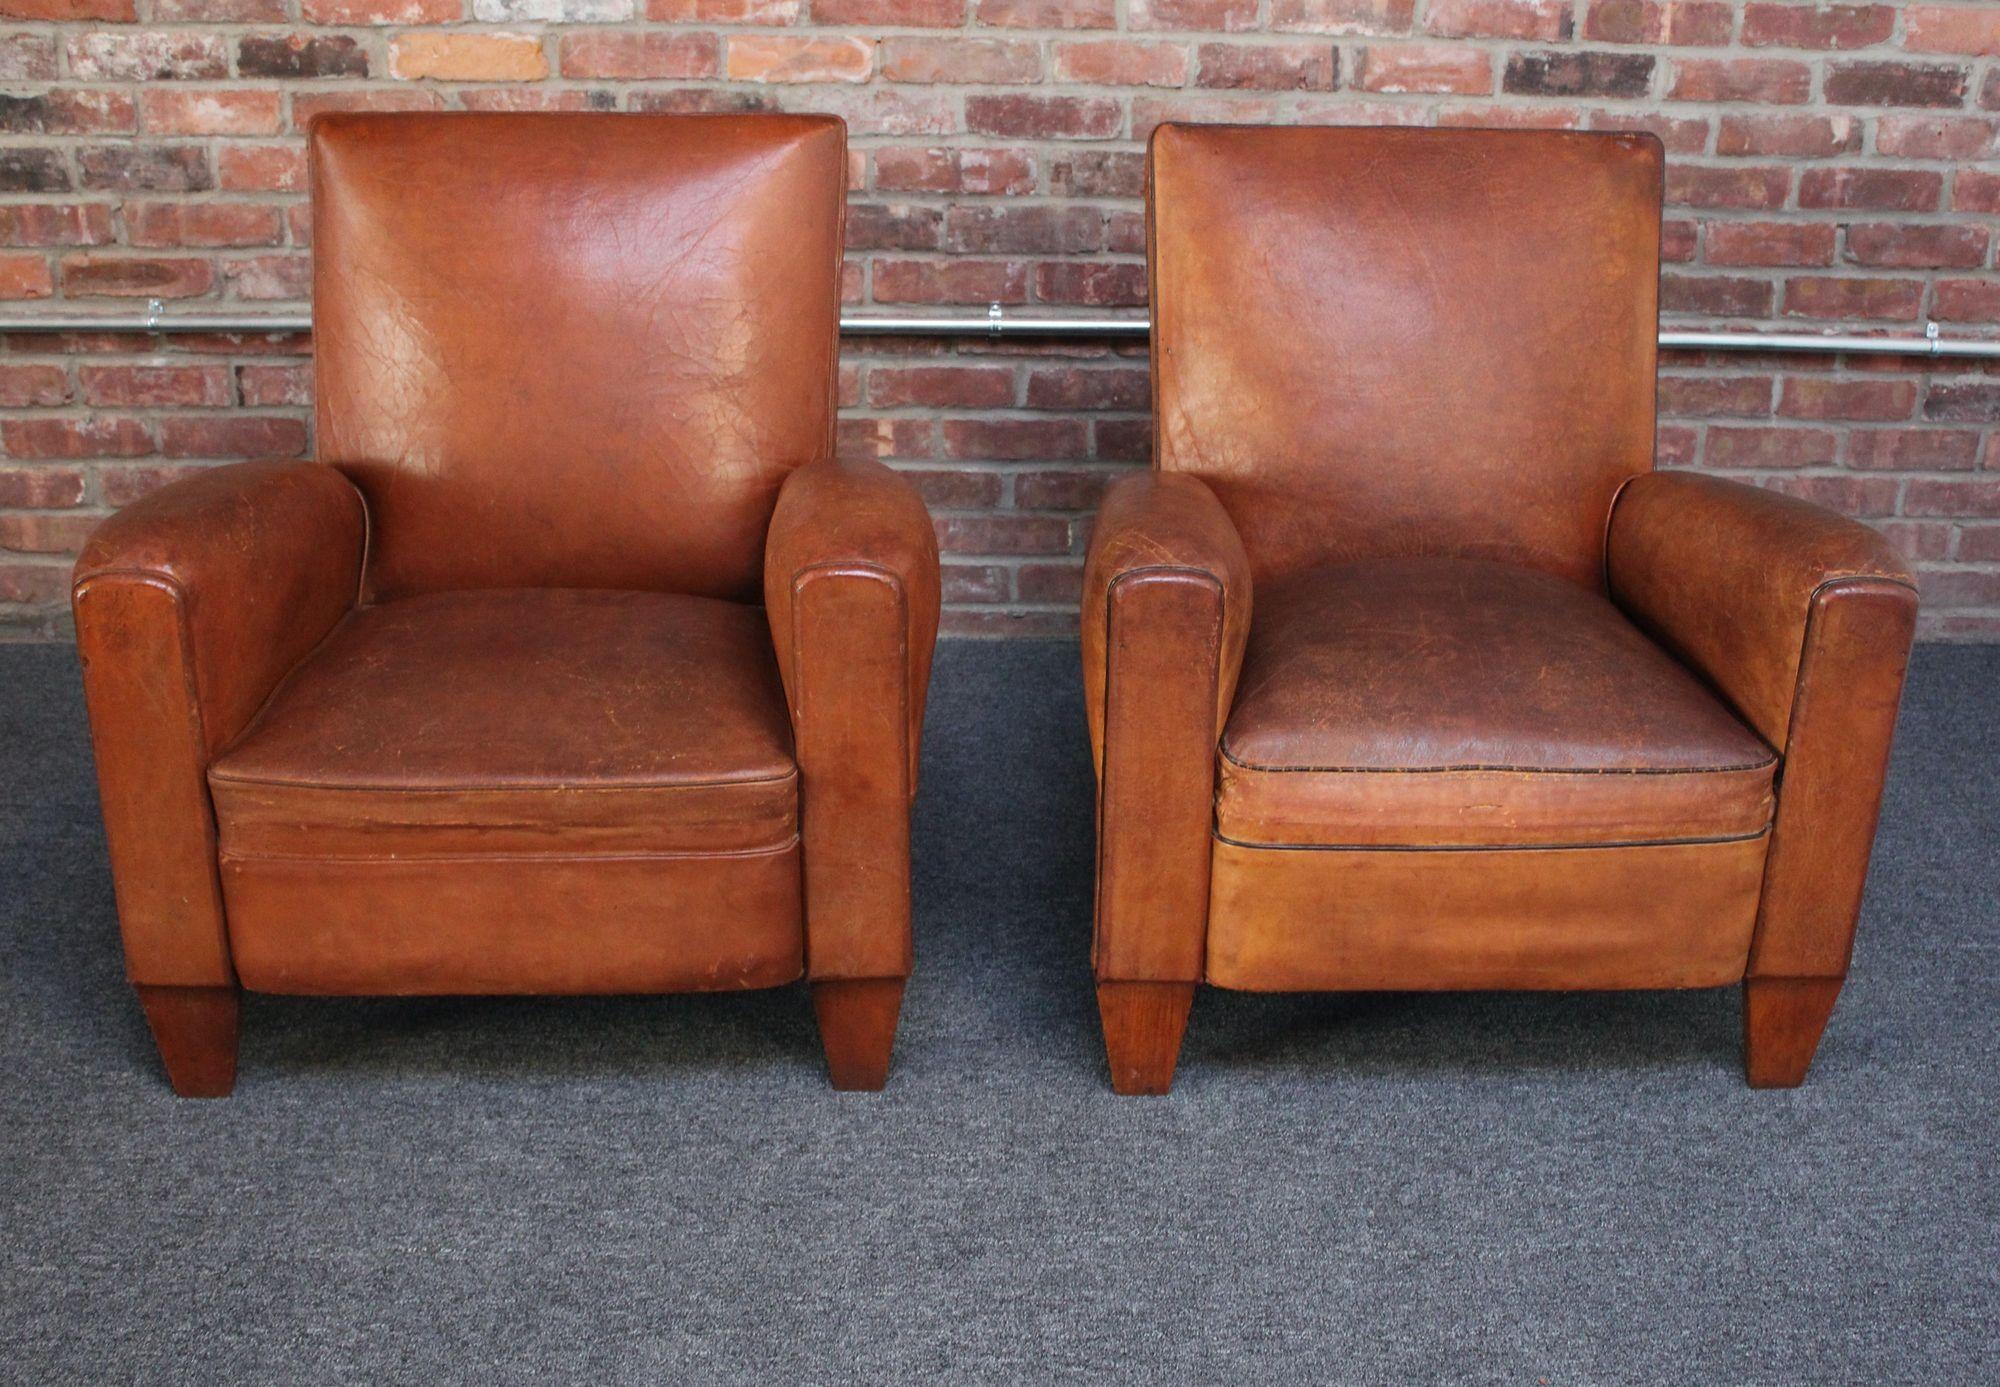 Handsome pair of 1940s French club chairs sourced in the south of France in supple sheep hide leather with squared-back forms and nailhead decoration to the back border, all supported by triangular wedge-feet in the front and carved, slightly angled